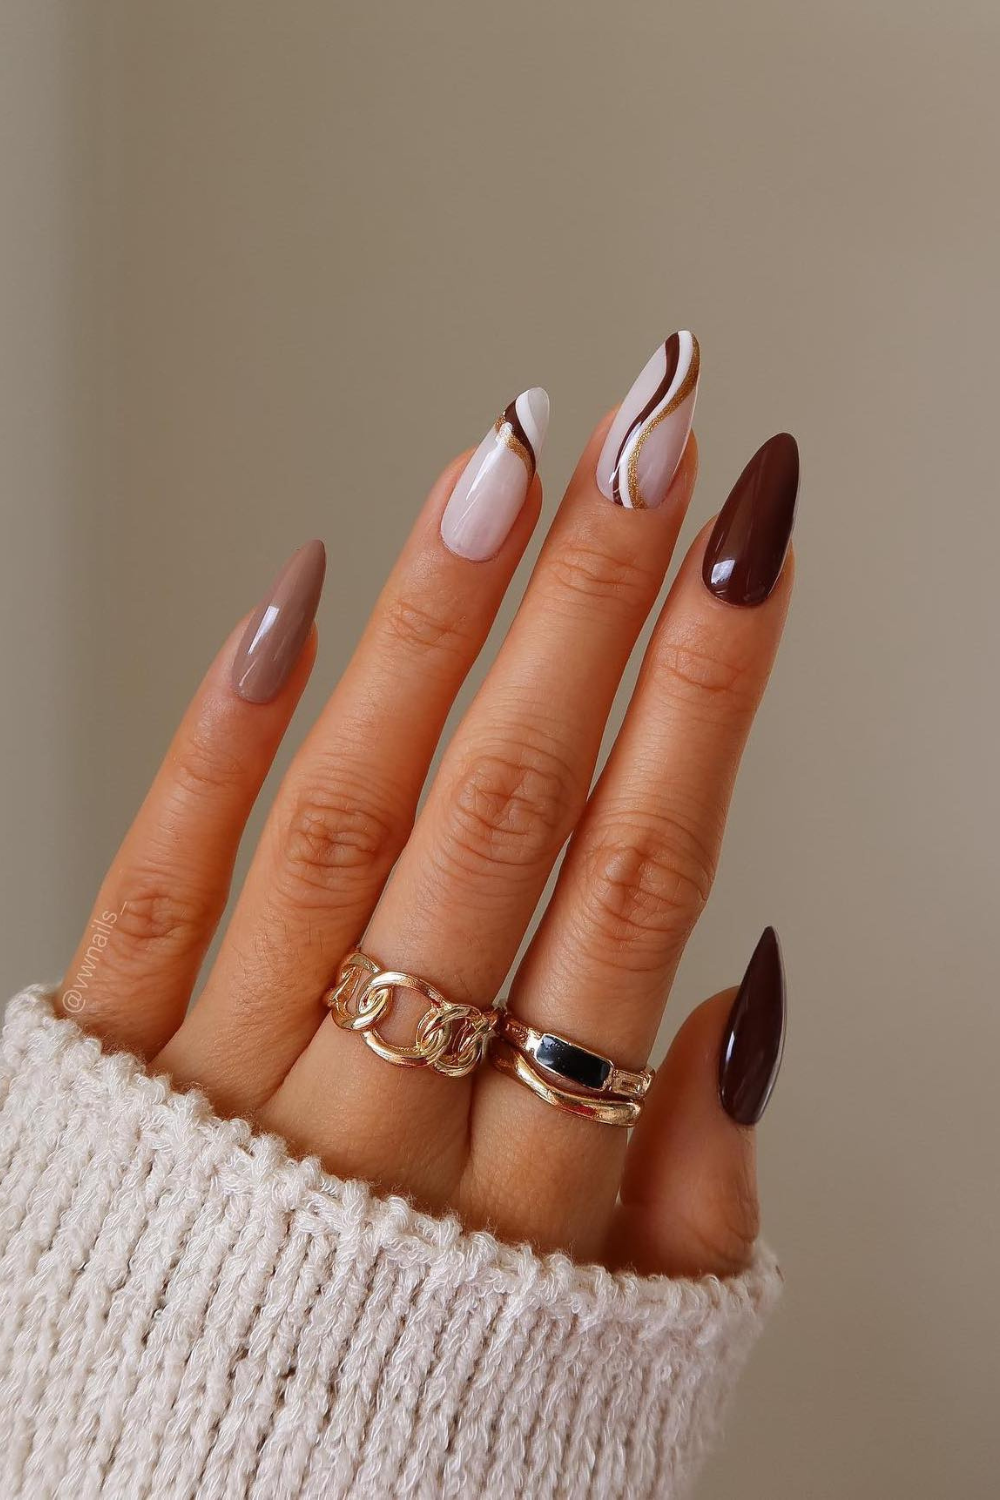 43 Brilliant Brown Nails To Blow Everyone Away!